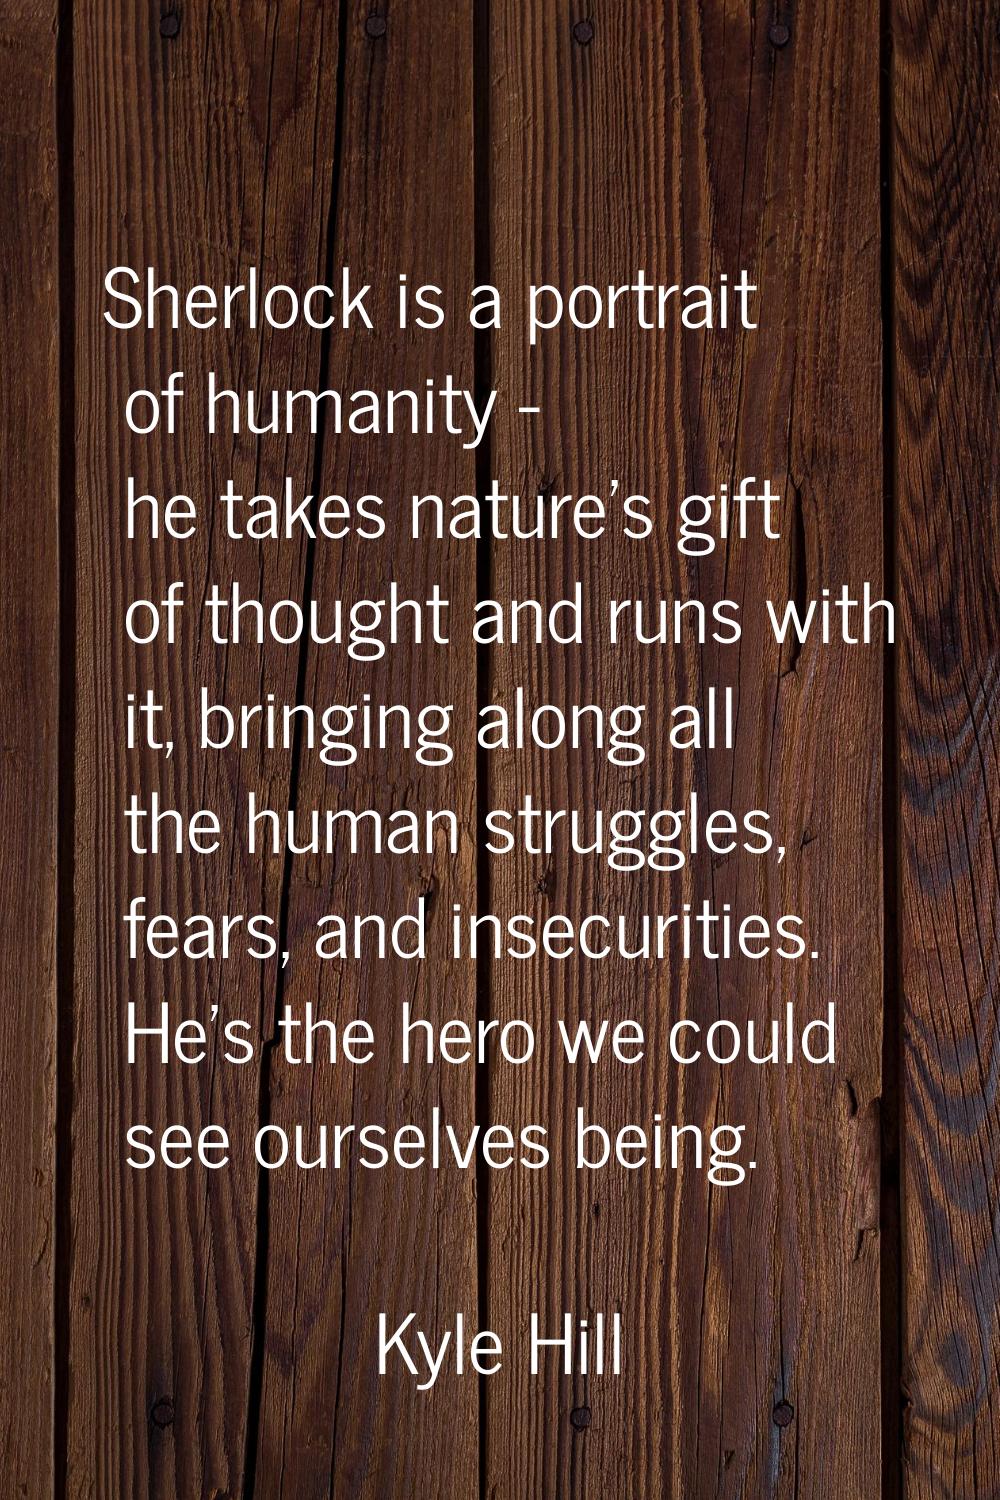 Sherlock is a portrait of humanity - he takes nature's gift of thought and runs with it, bringing a